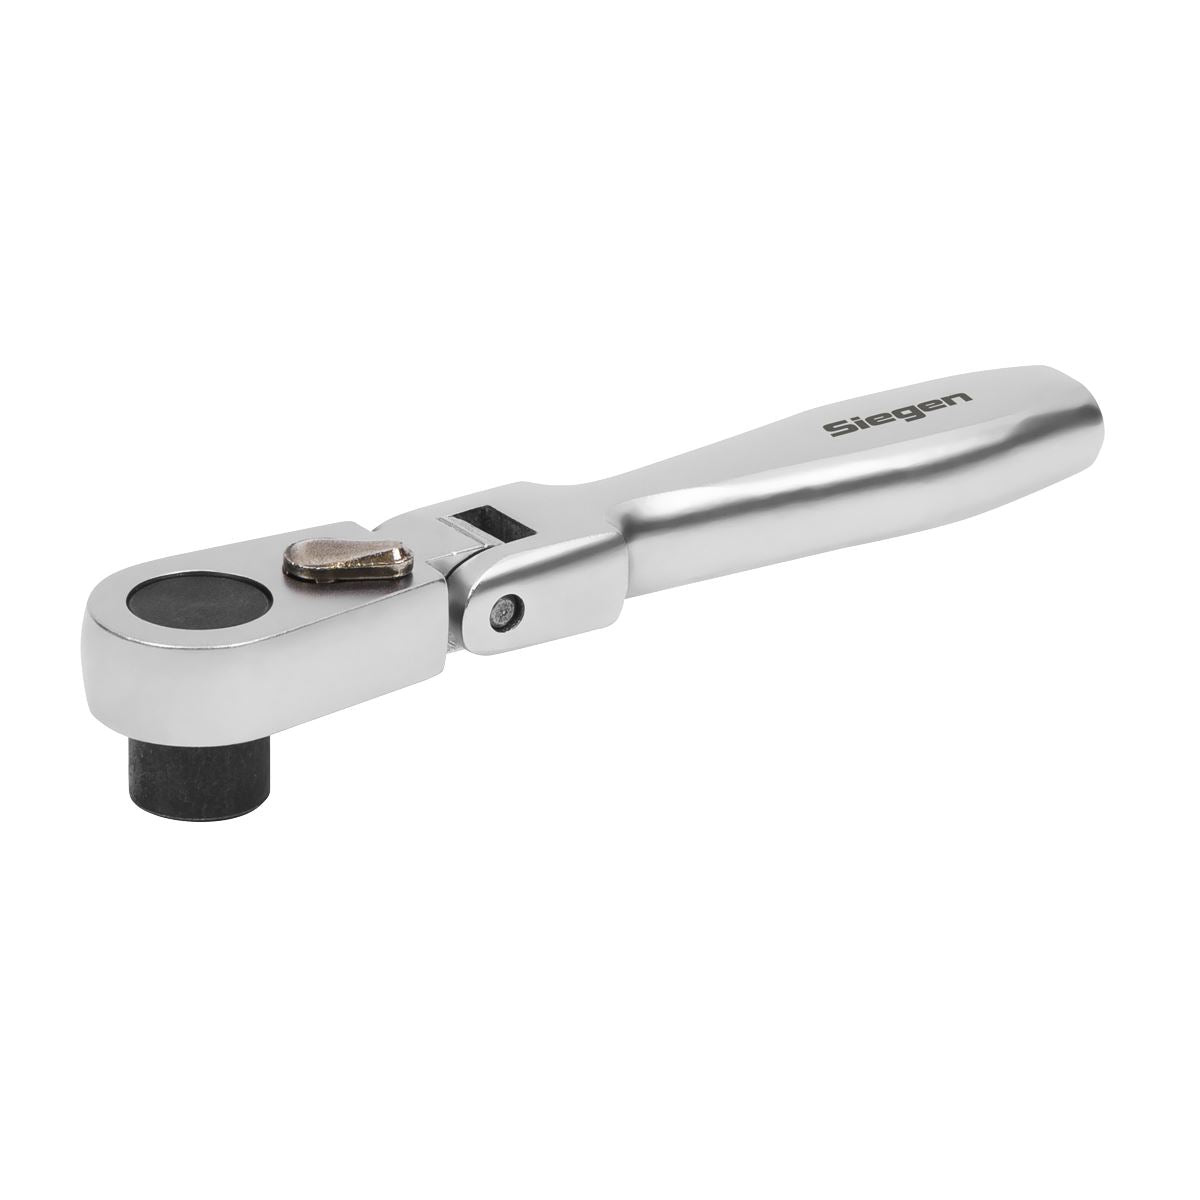 Siegen by Sealey Micro Flexi-Head Ratchet Wrench 1/4"Sq Drive